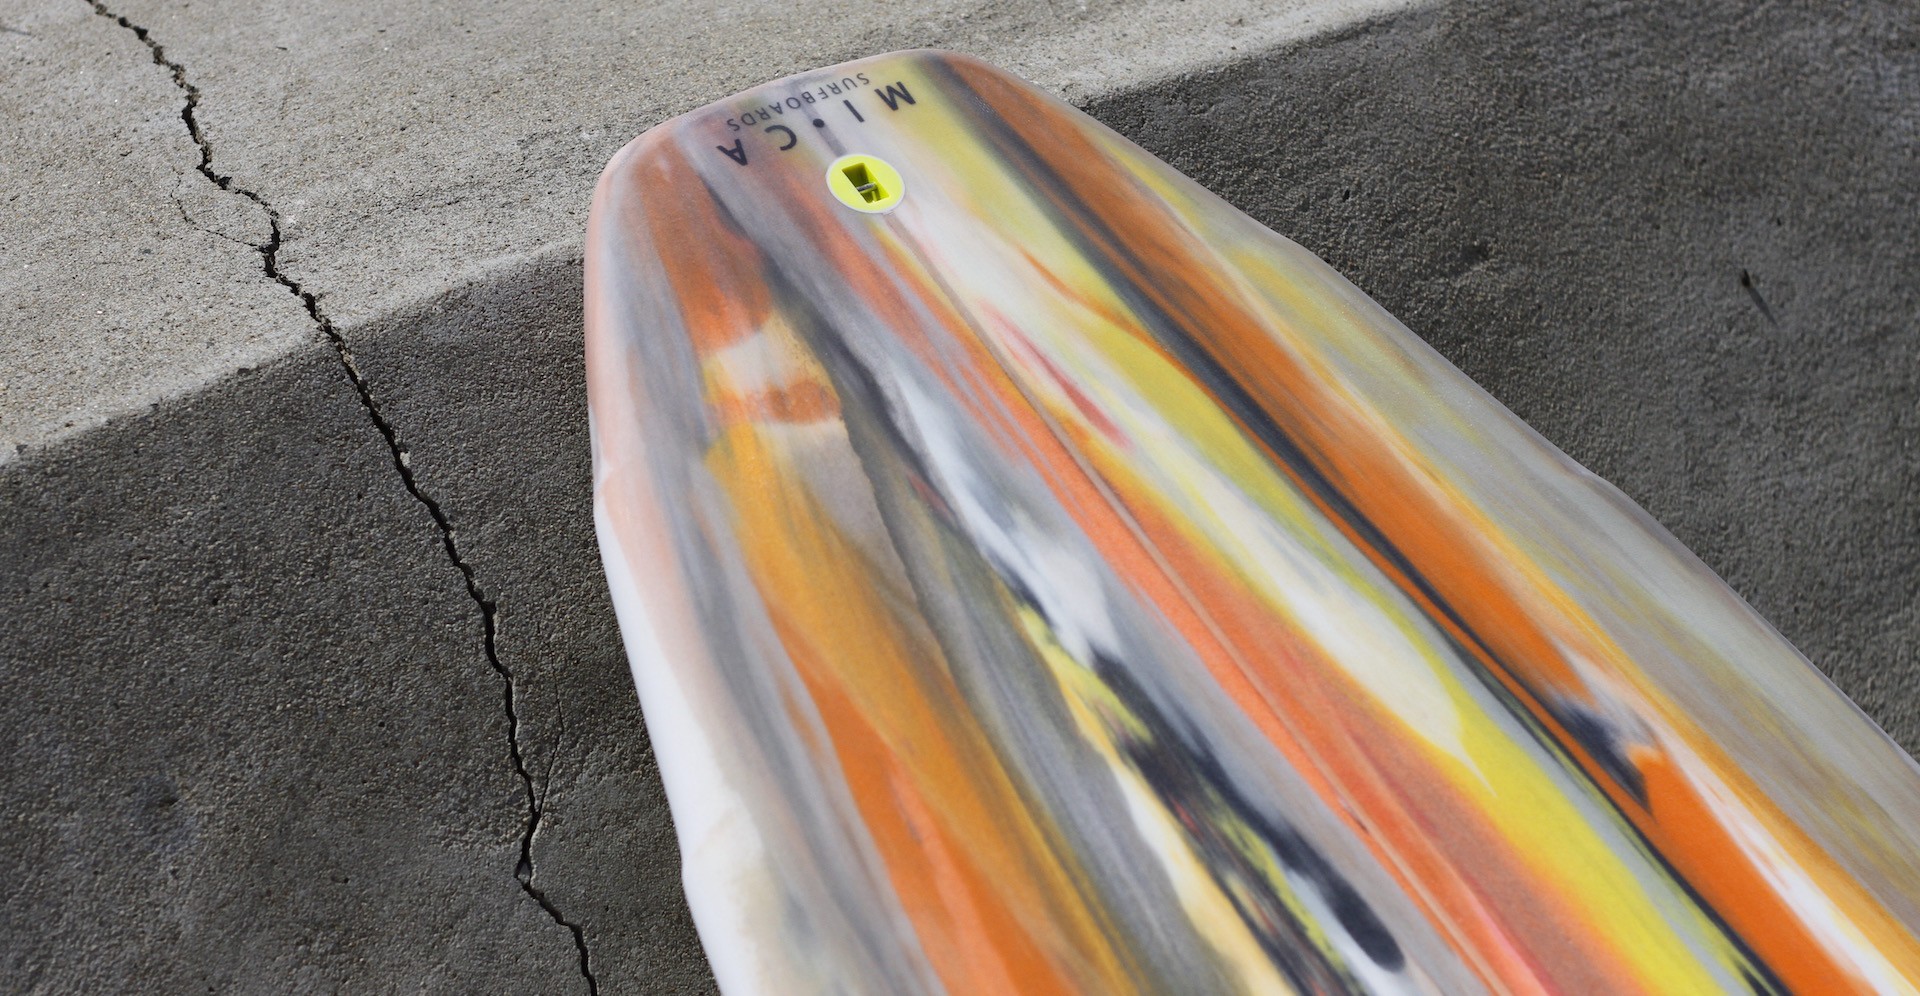 Super fast board for small waves. Buy straight at Micasurfboards in Ericeria.